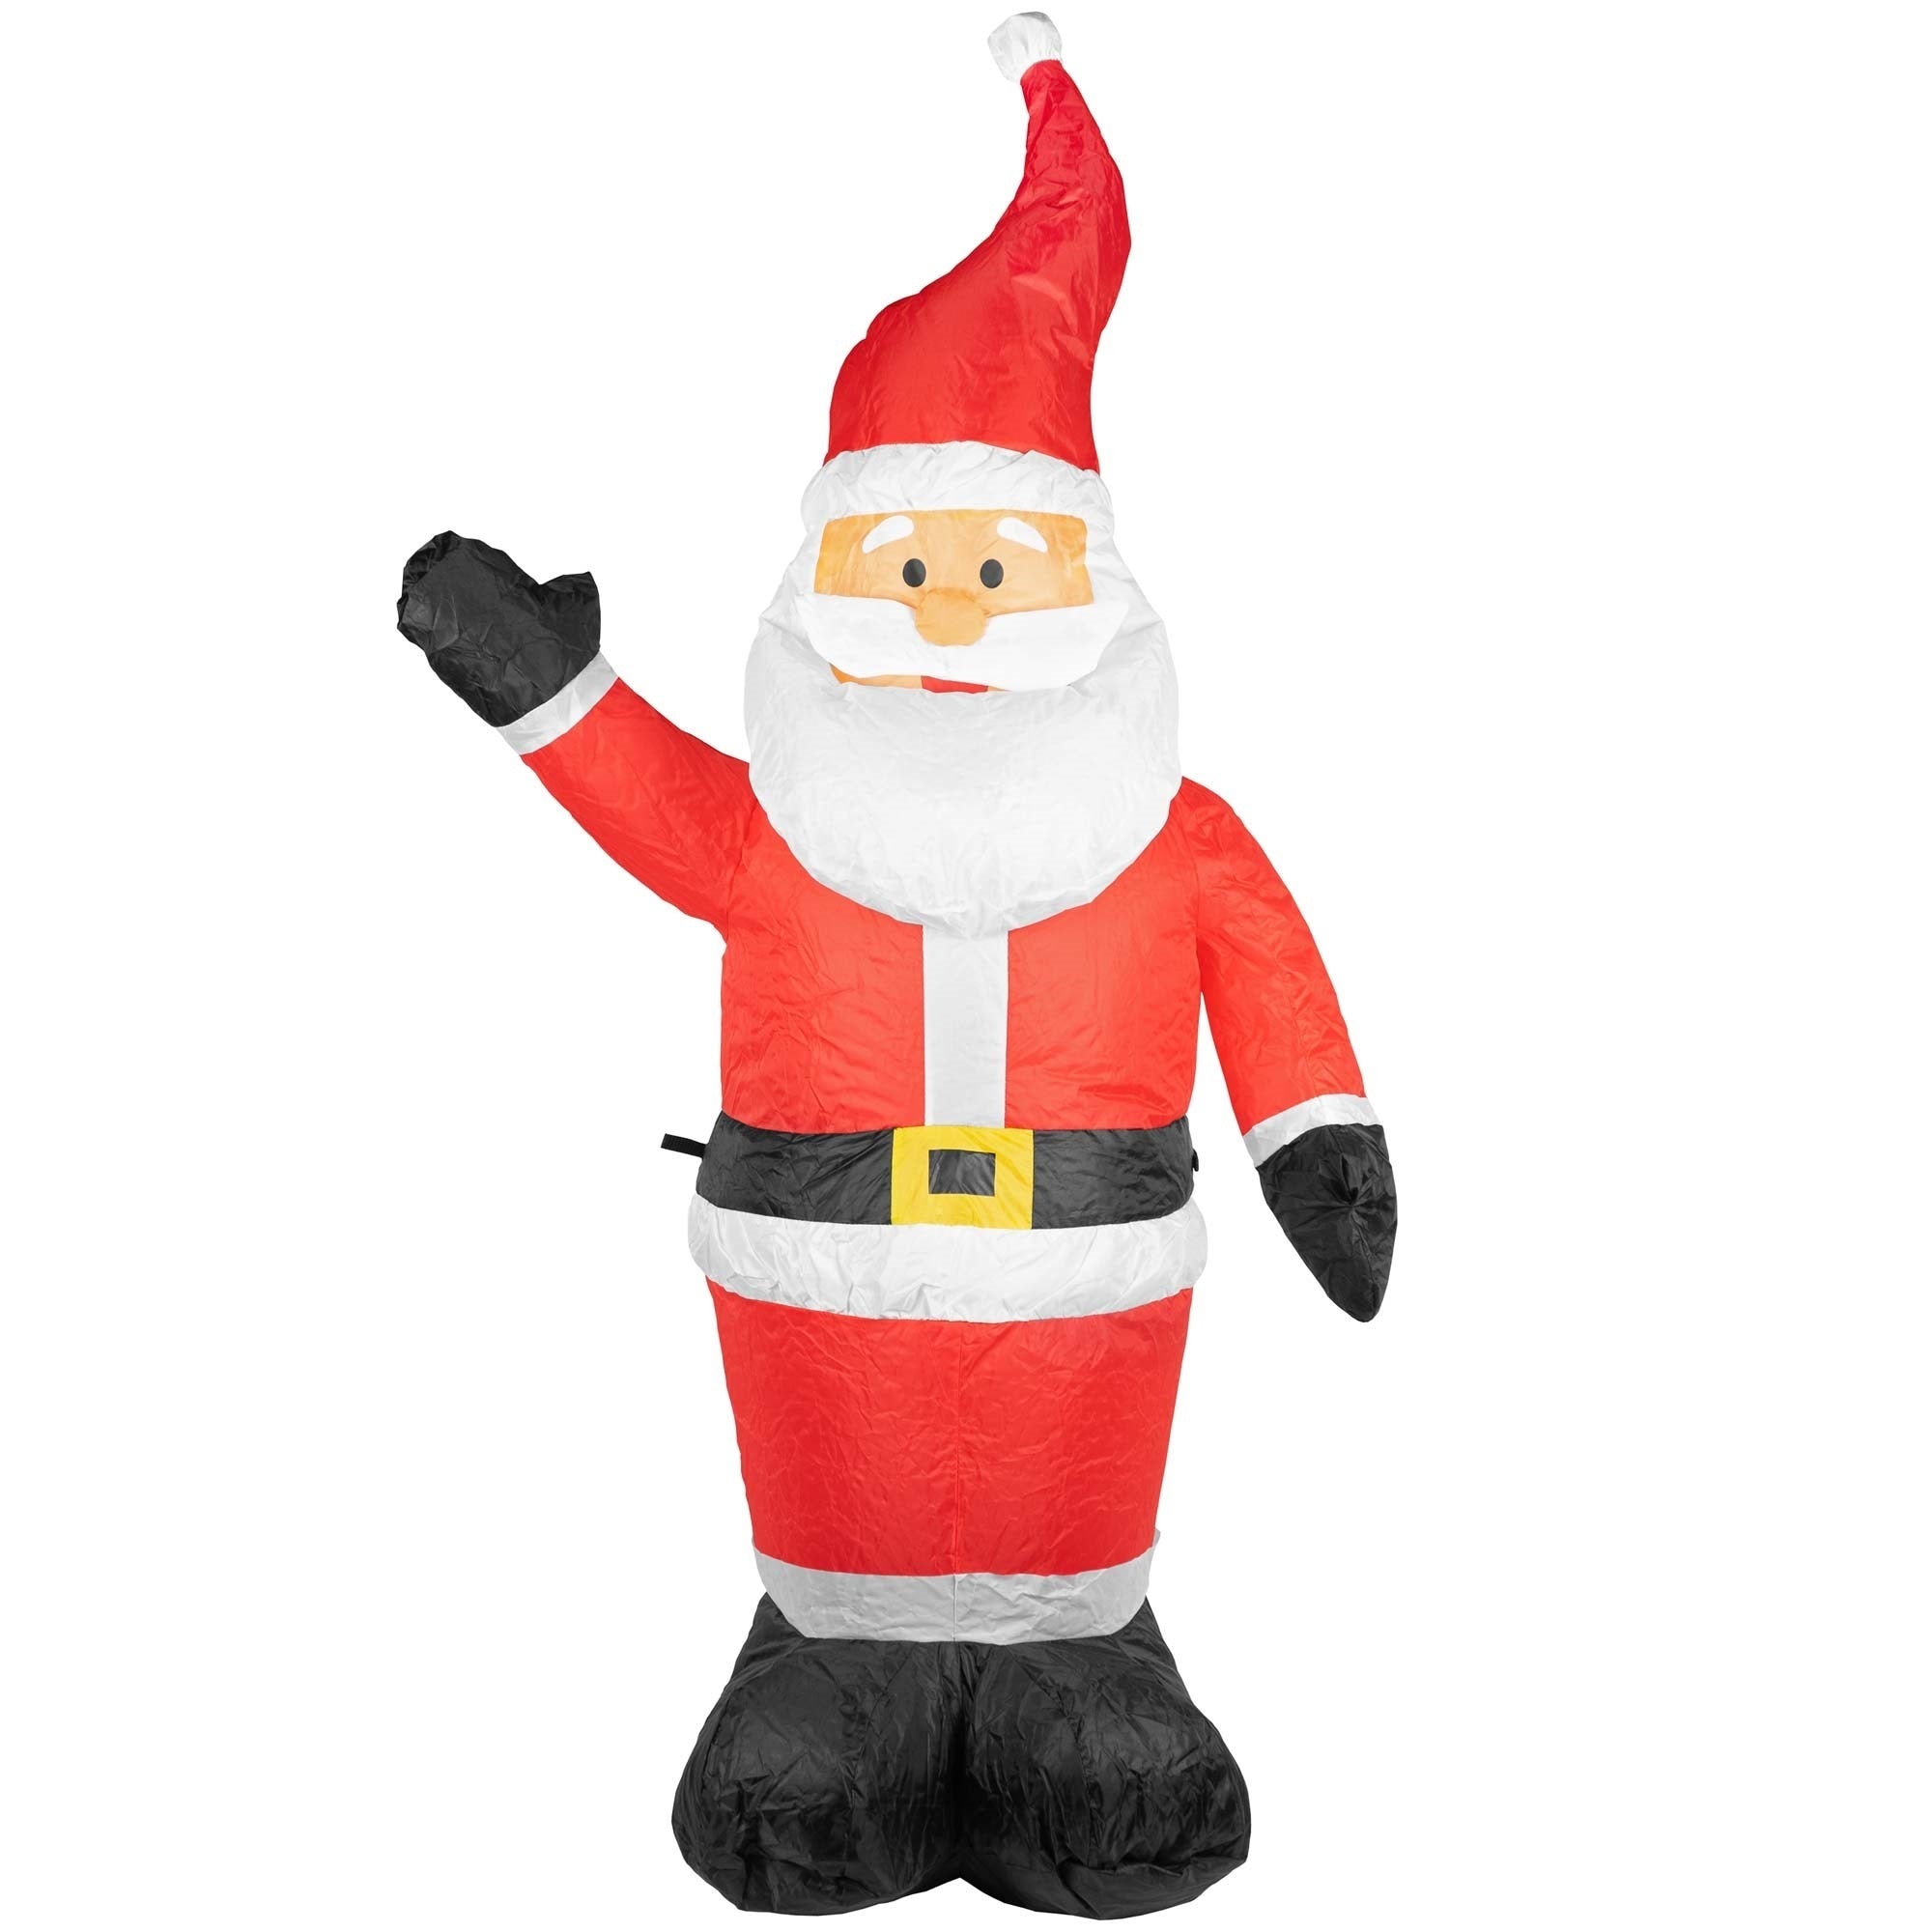 ProductWorks Candy Cane Lane Inflatable Santa Outdoor Display, 4'